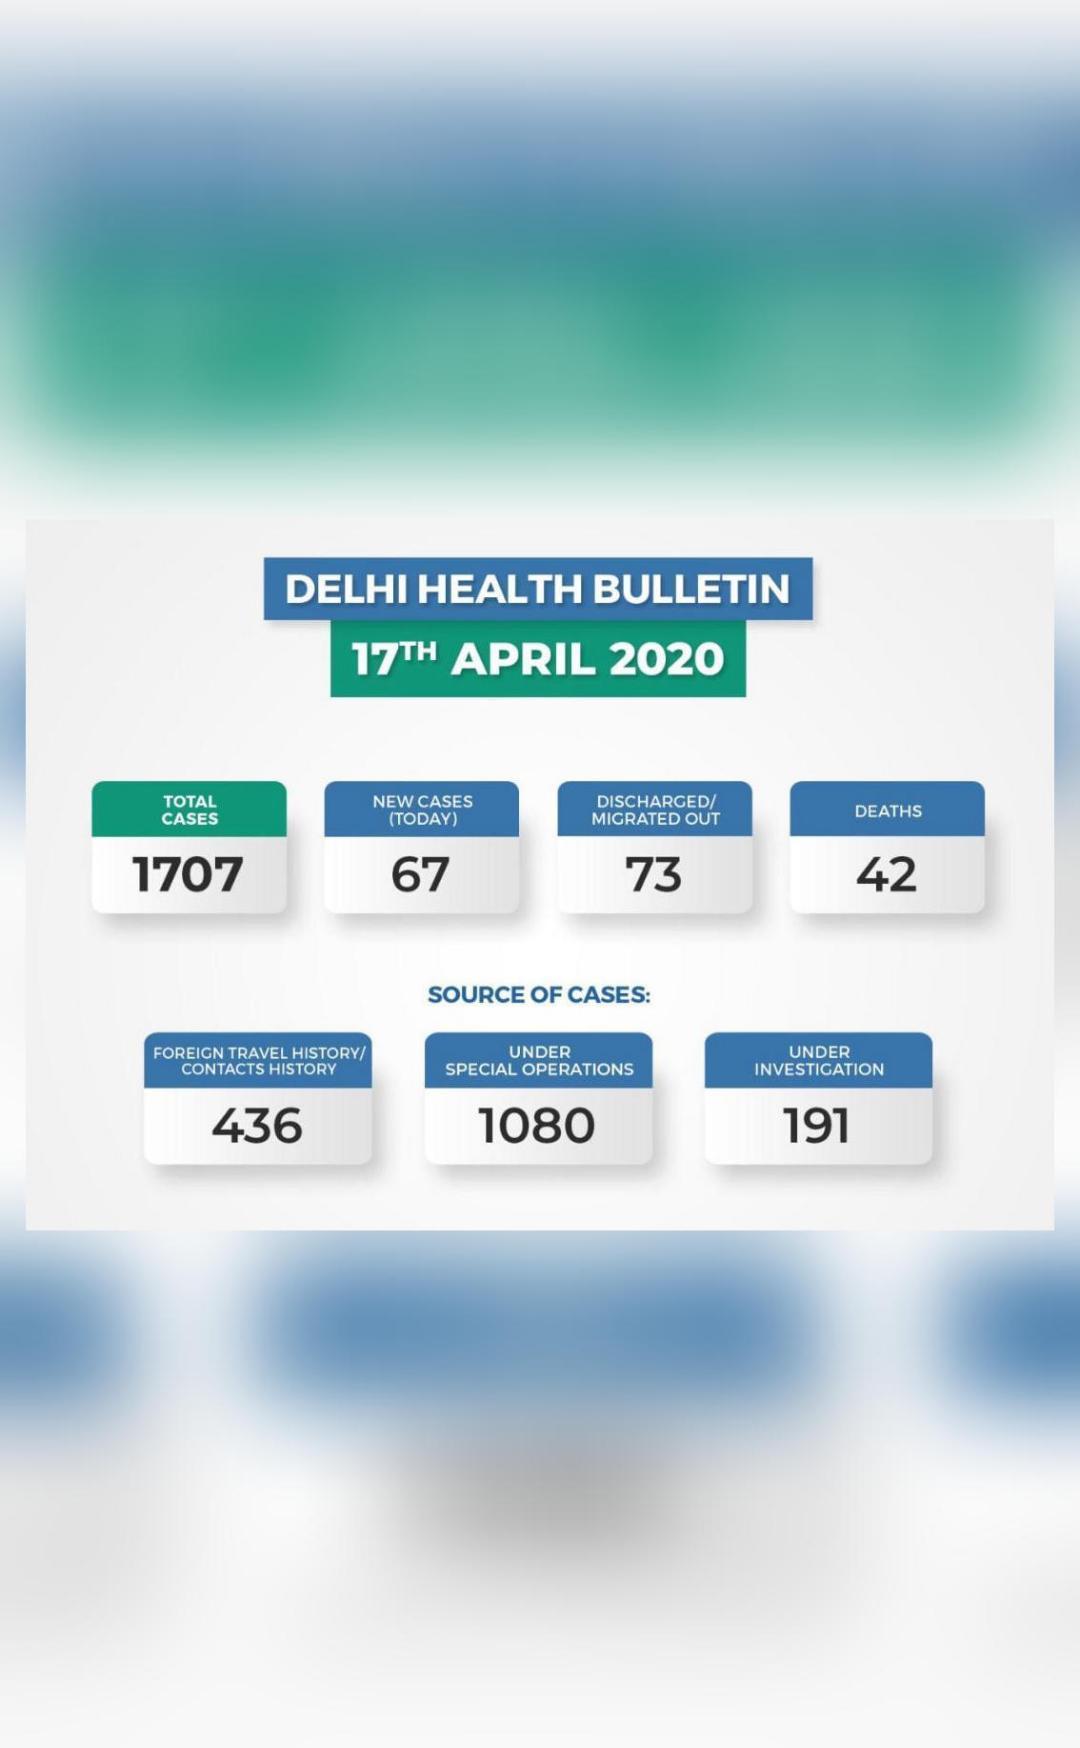 Delhi Coronavirus Cases Rise To 1 707 After 67 New Cases Reported Today